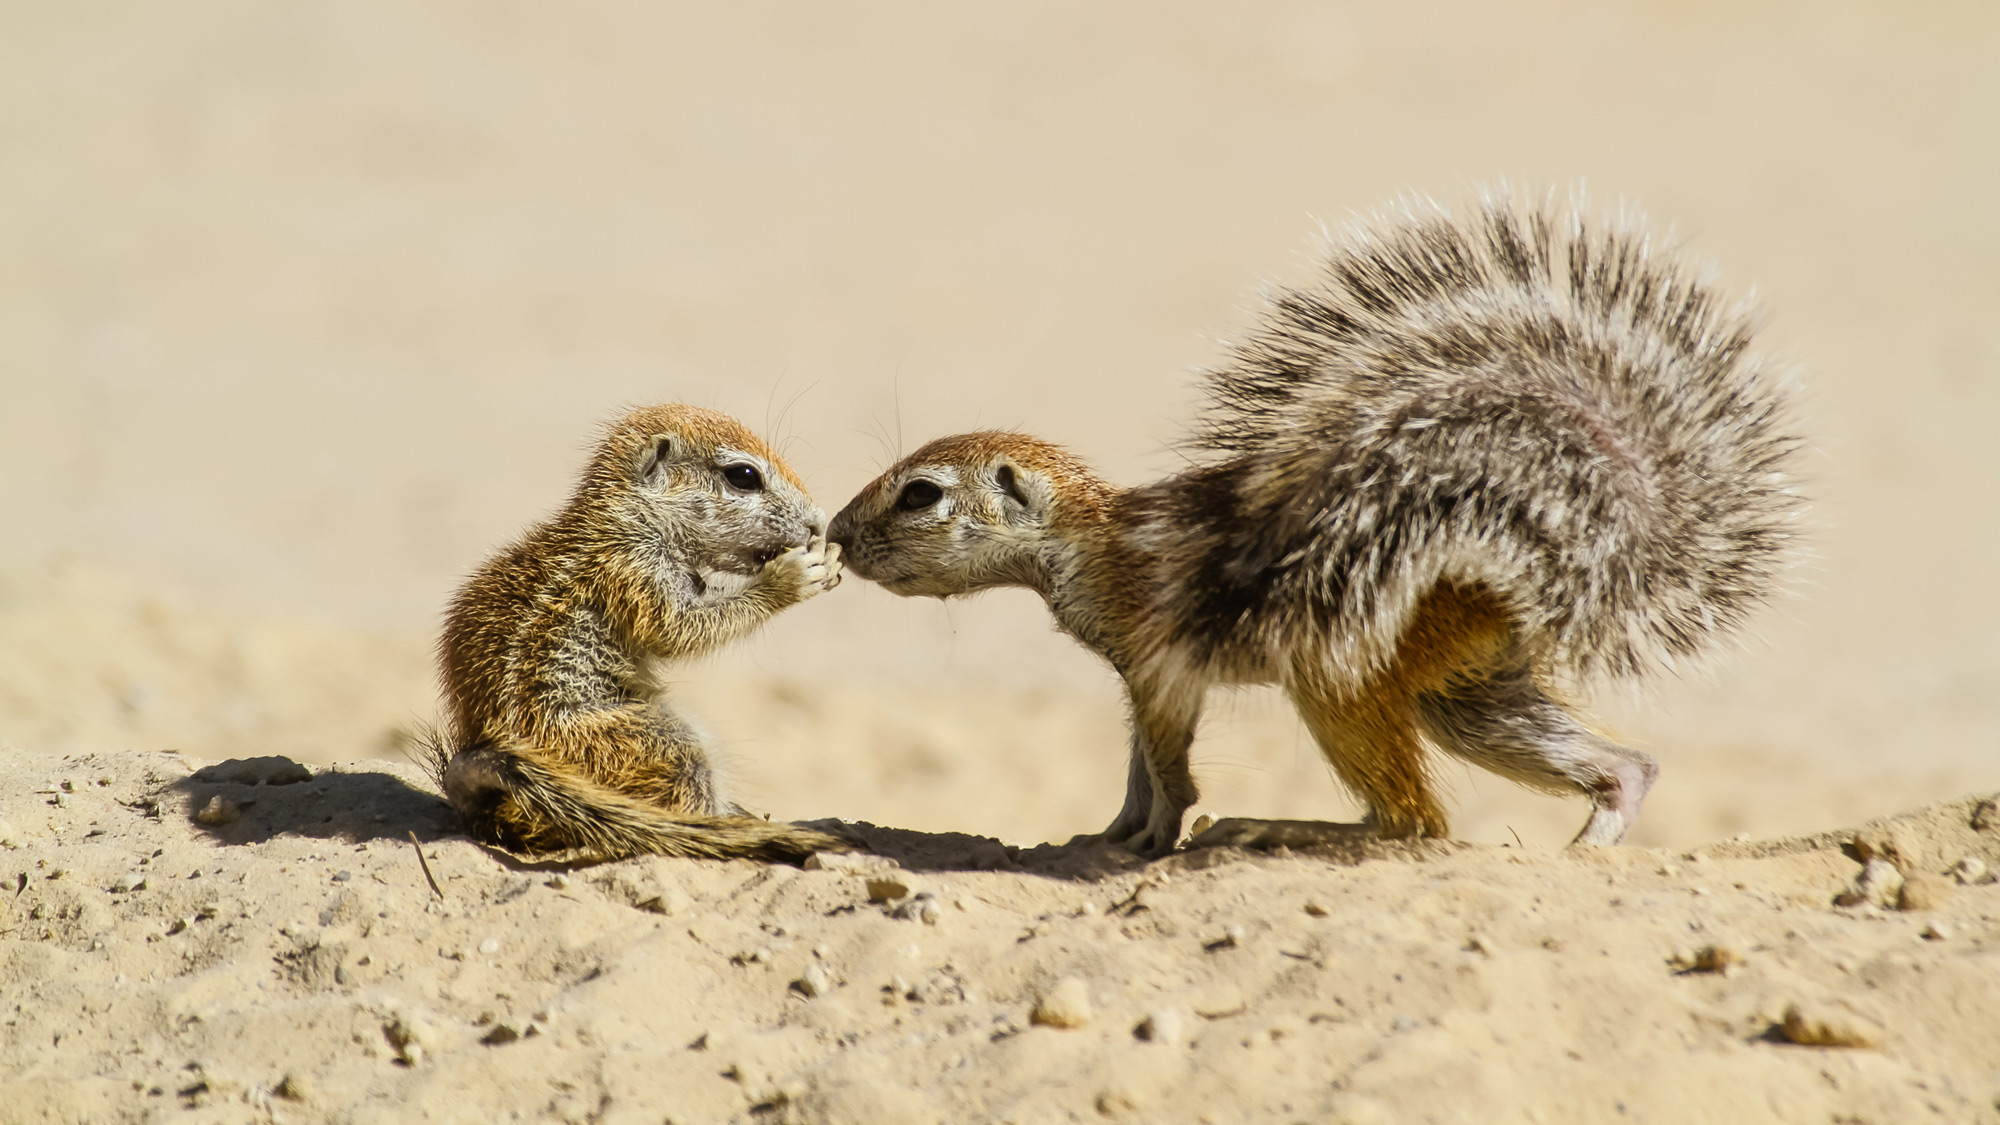 Two Cape ground squirrels 'kiss' in Kgalagadi Transfrontier Park, South Africa